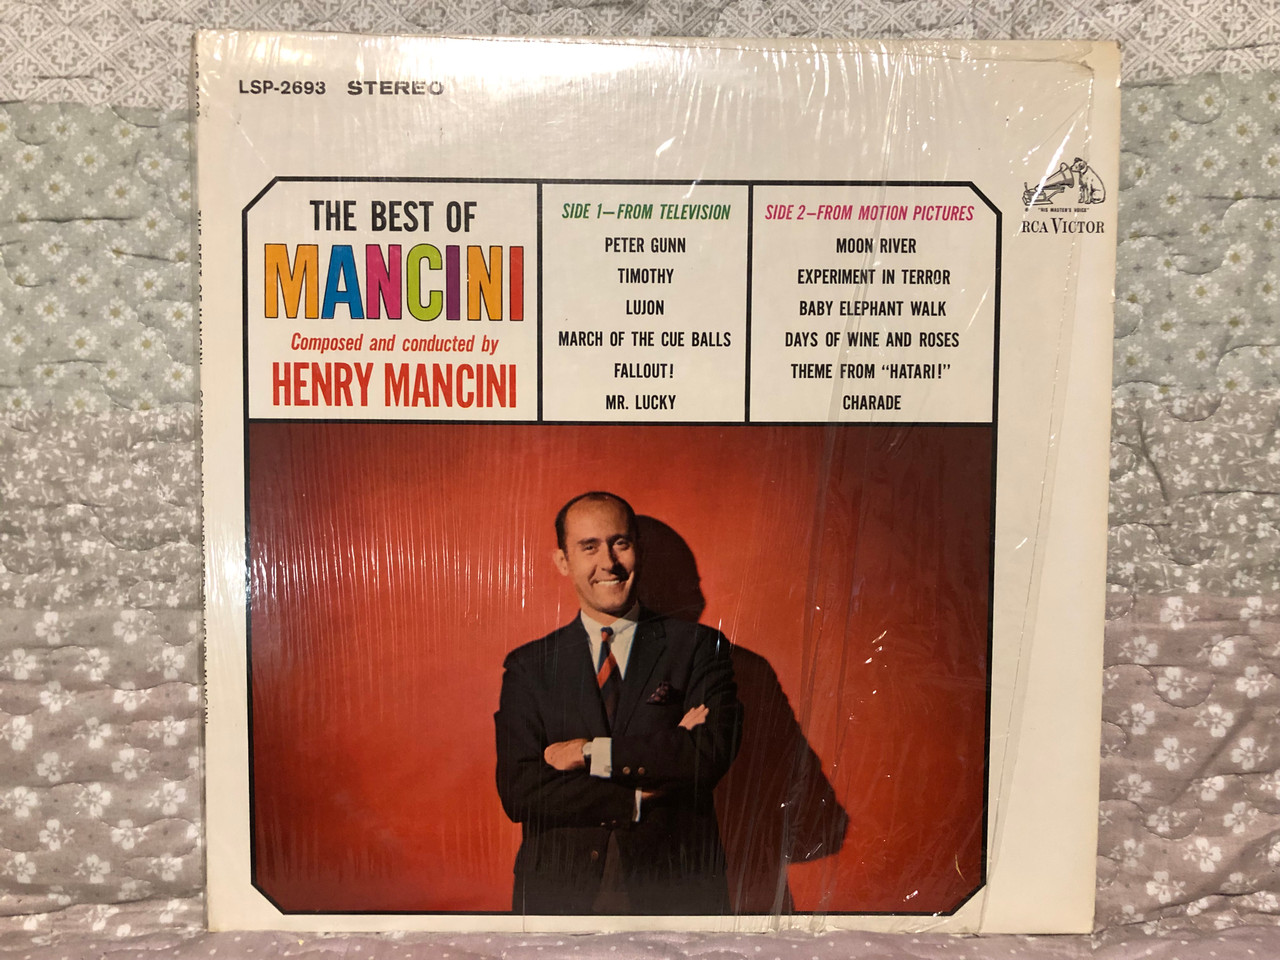 https://cdn10.bigcommerce.com/s-62bdpkt7pb/products/0/images/265700/The_Best_Of_Mancini_-_Composed_and_conducted_by_Henry_Mancini_Side_1_-_From_Television_Side_2_-_From_Motion_Pictures_RCA_Victor_LP_1964_Stereo_LSP-2693_1__99977.1675679899.1280.1280.JPG?c=2&_gl=1*tl2v5t*_ga*MjA2NTIxMjE2MC4xNTkwNTEyNTMy*_ga_WS2VZYPC6G*MTY3NTY2NTgzOS43NDUuMS4xNjc1Njc5Njc2LjE4LjAuMA..